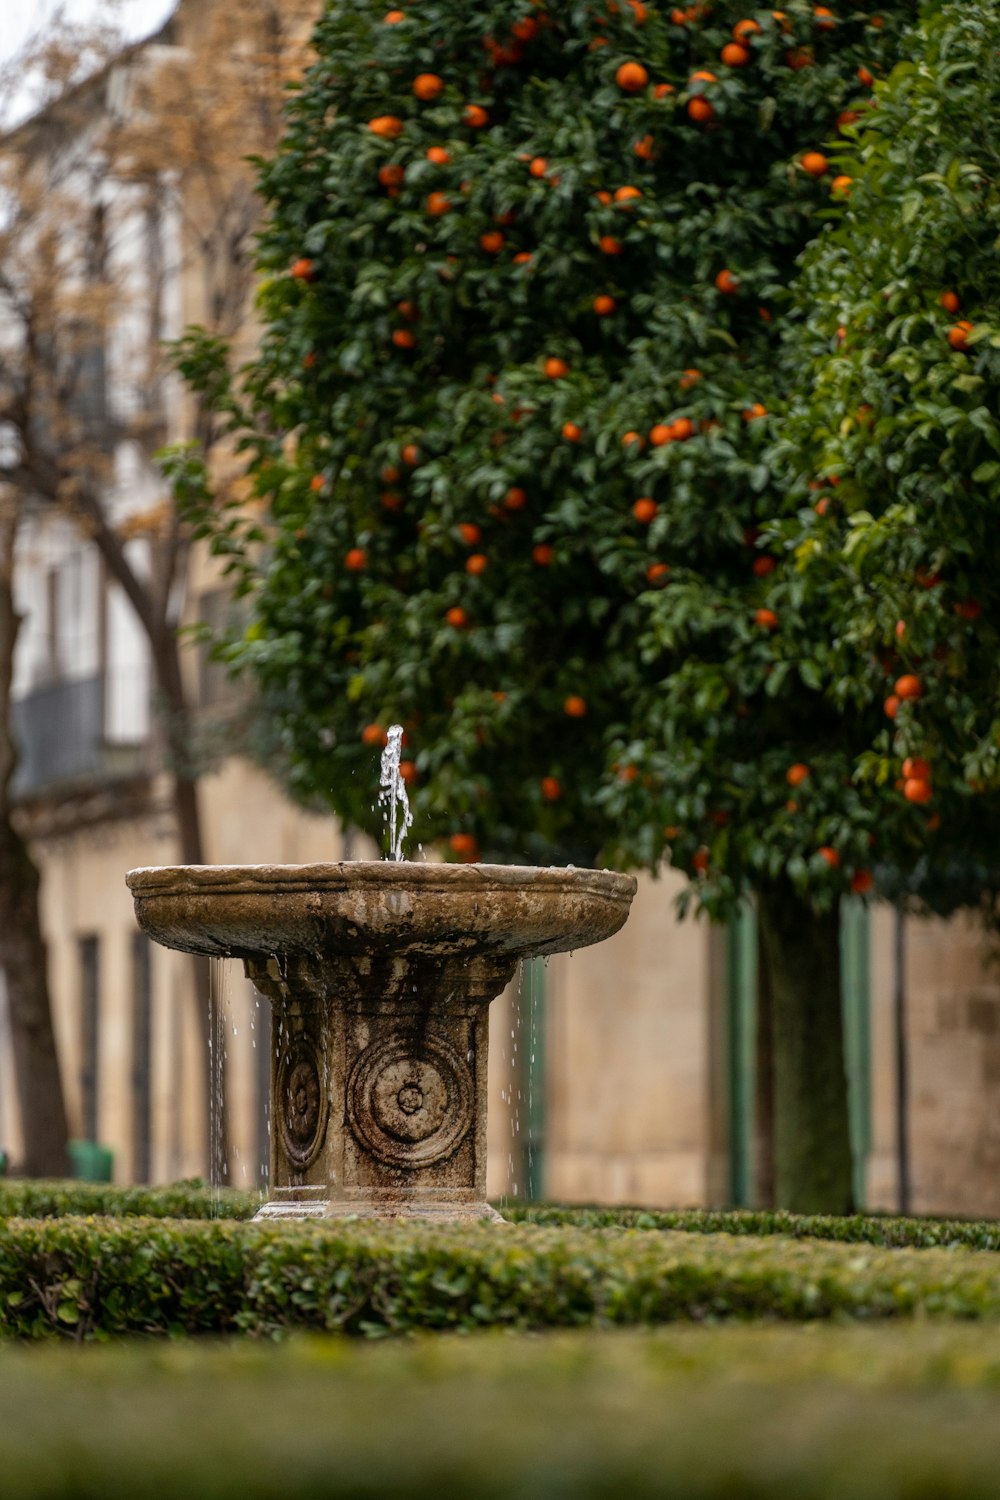 a small figurine sitting on top of a fountain